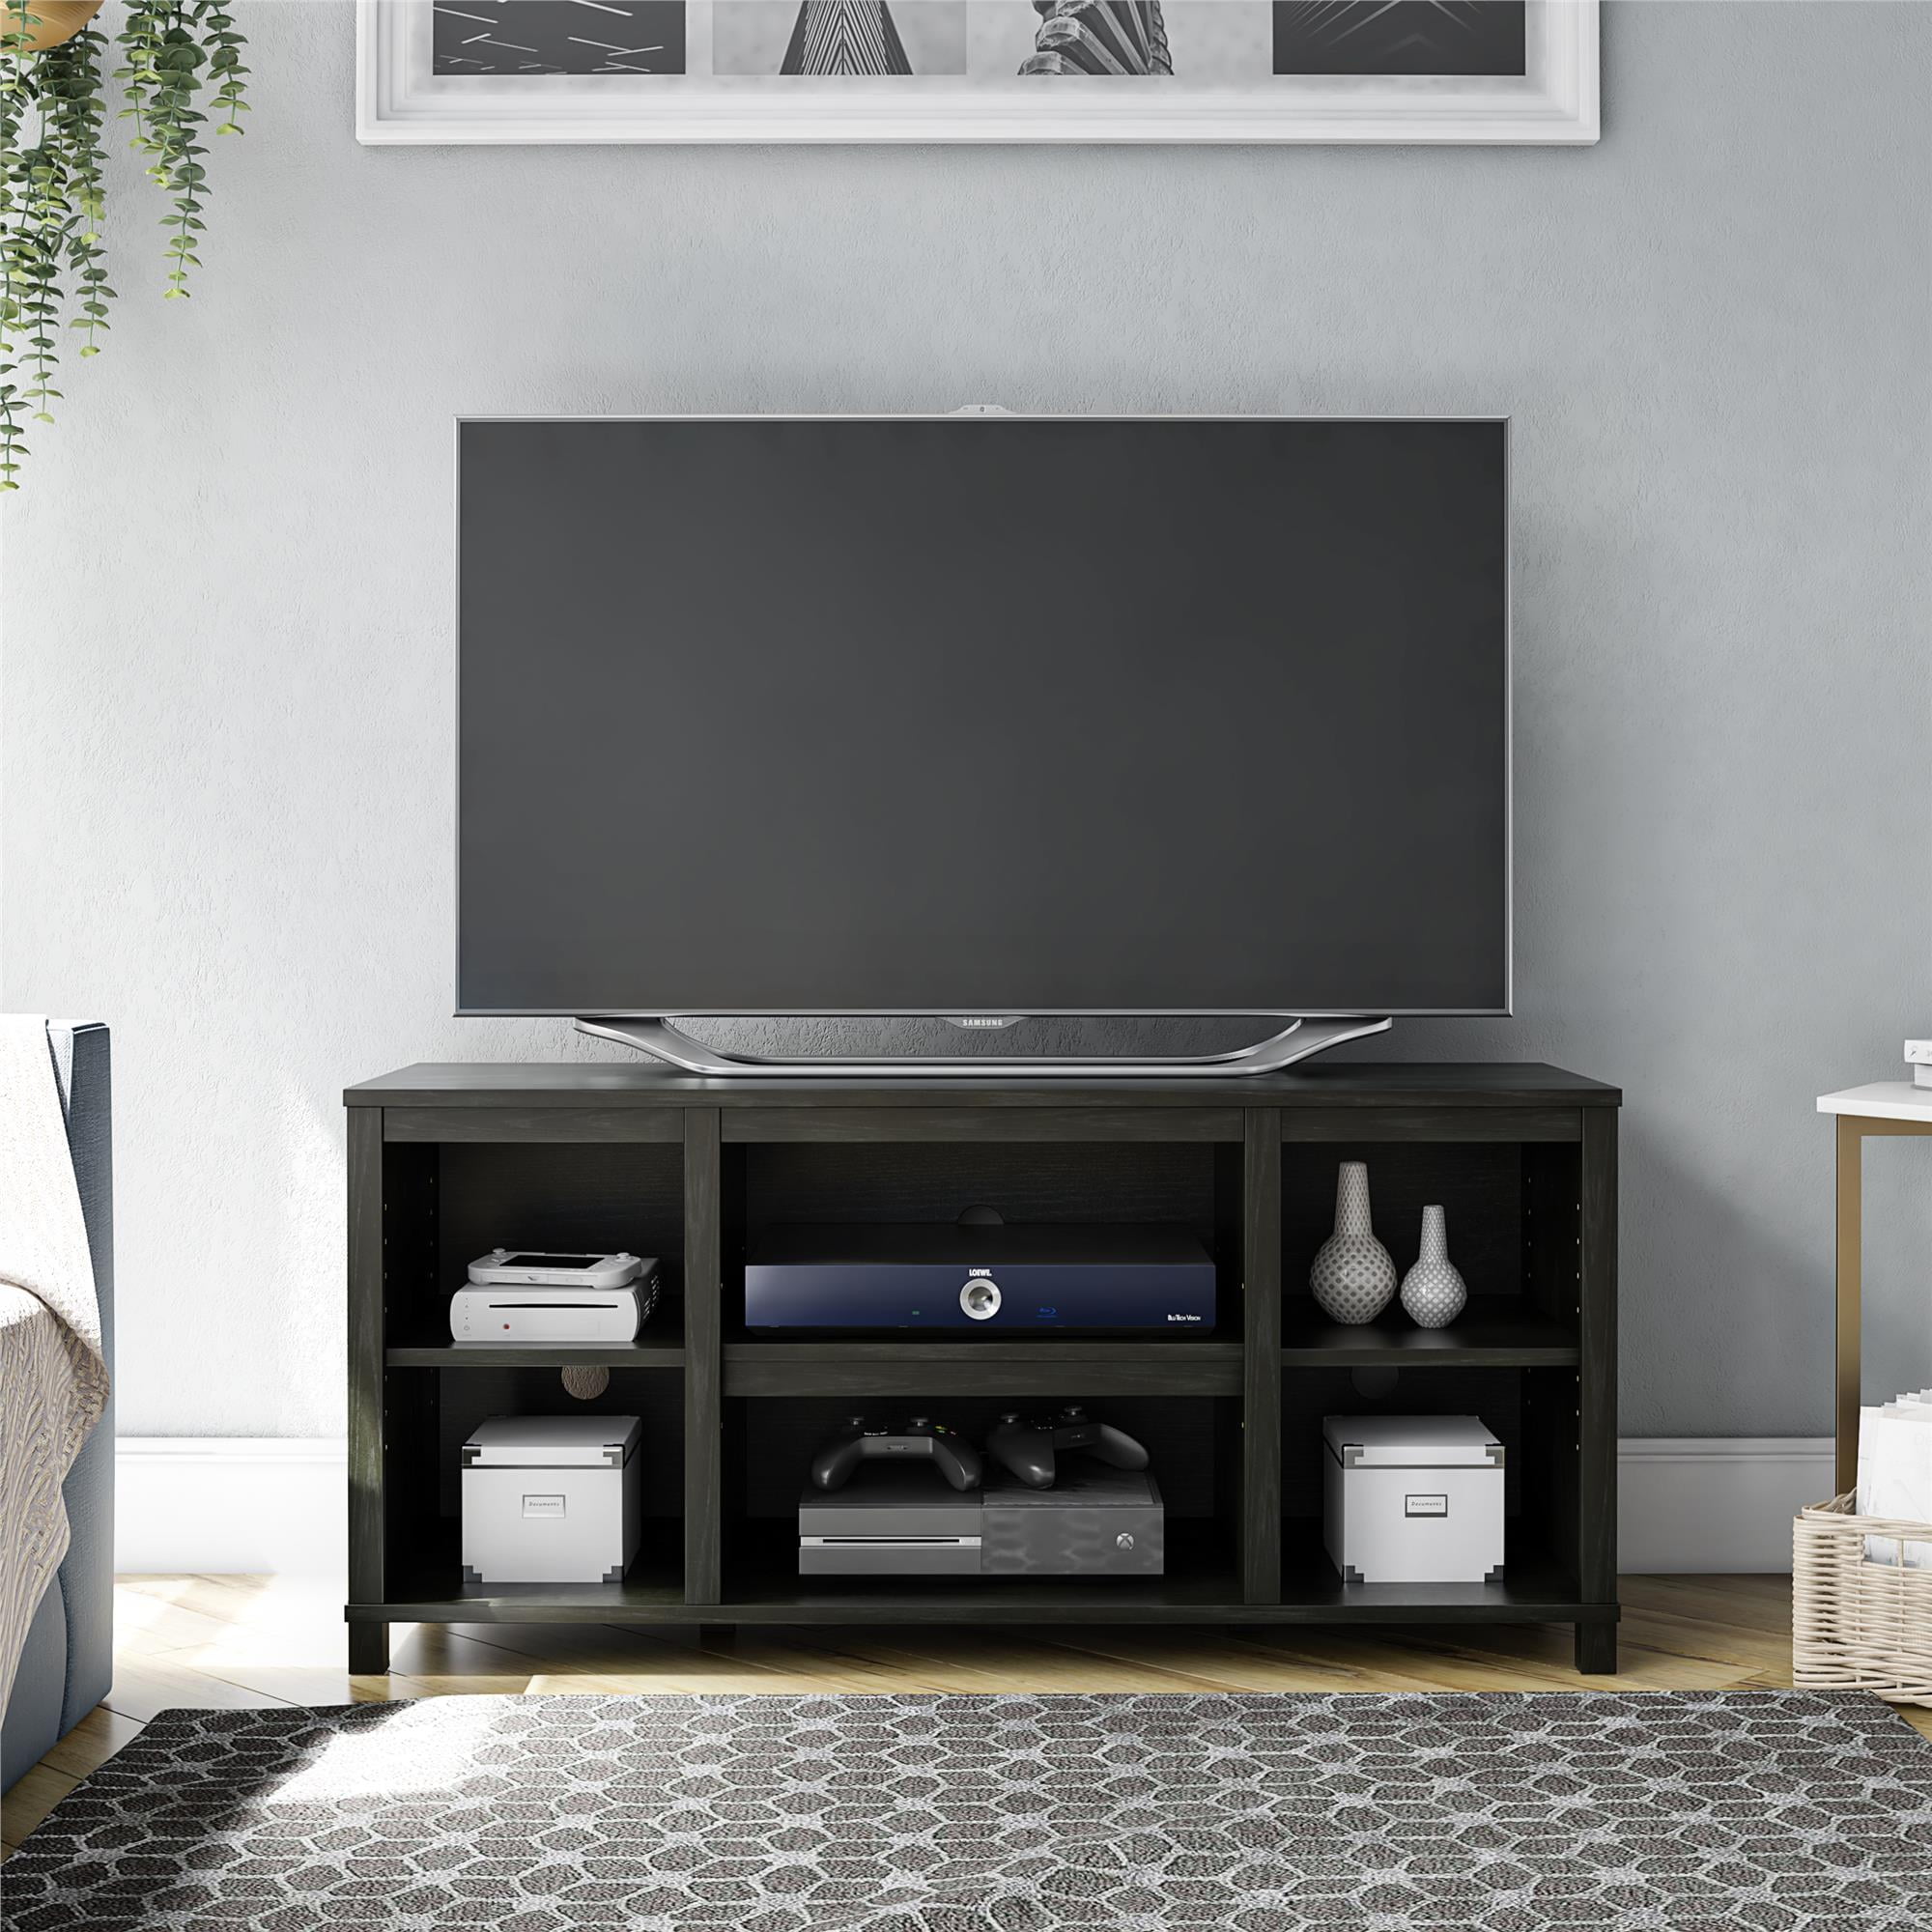 Mainstays Parsons Cubby TV Stand for TVs up to 50", True ...